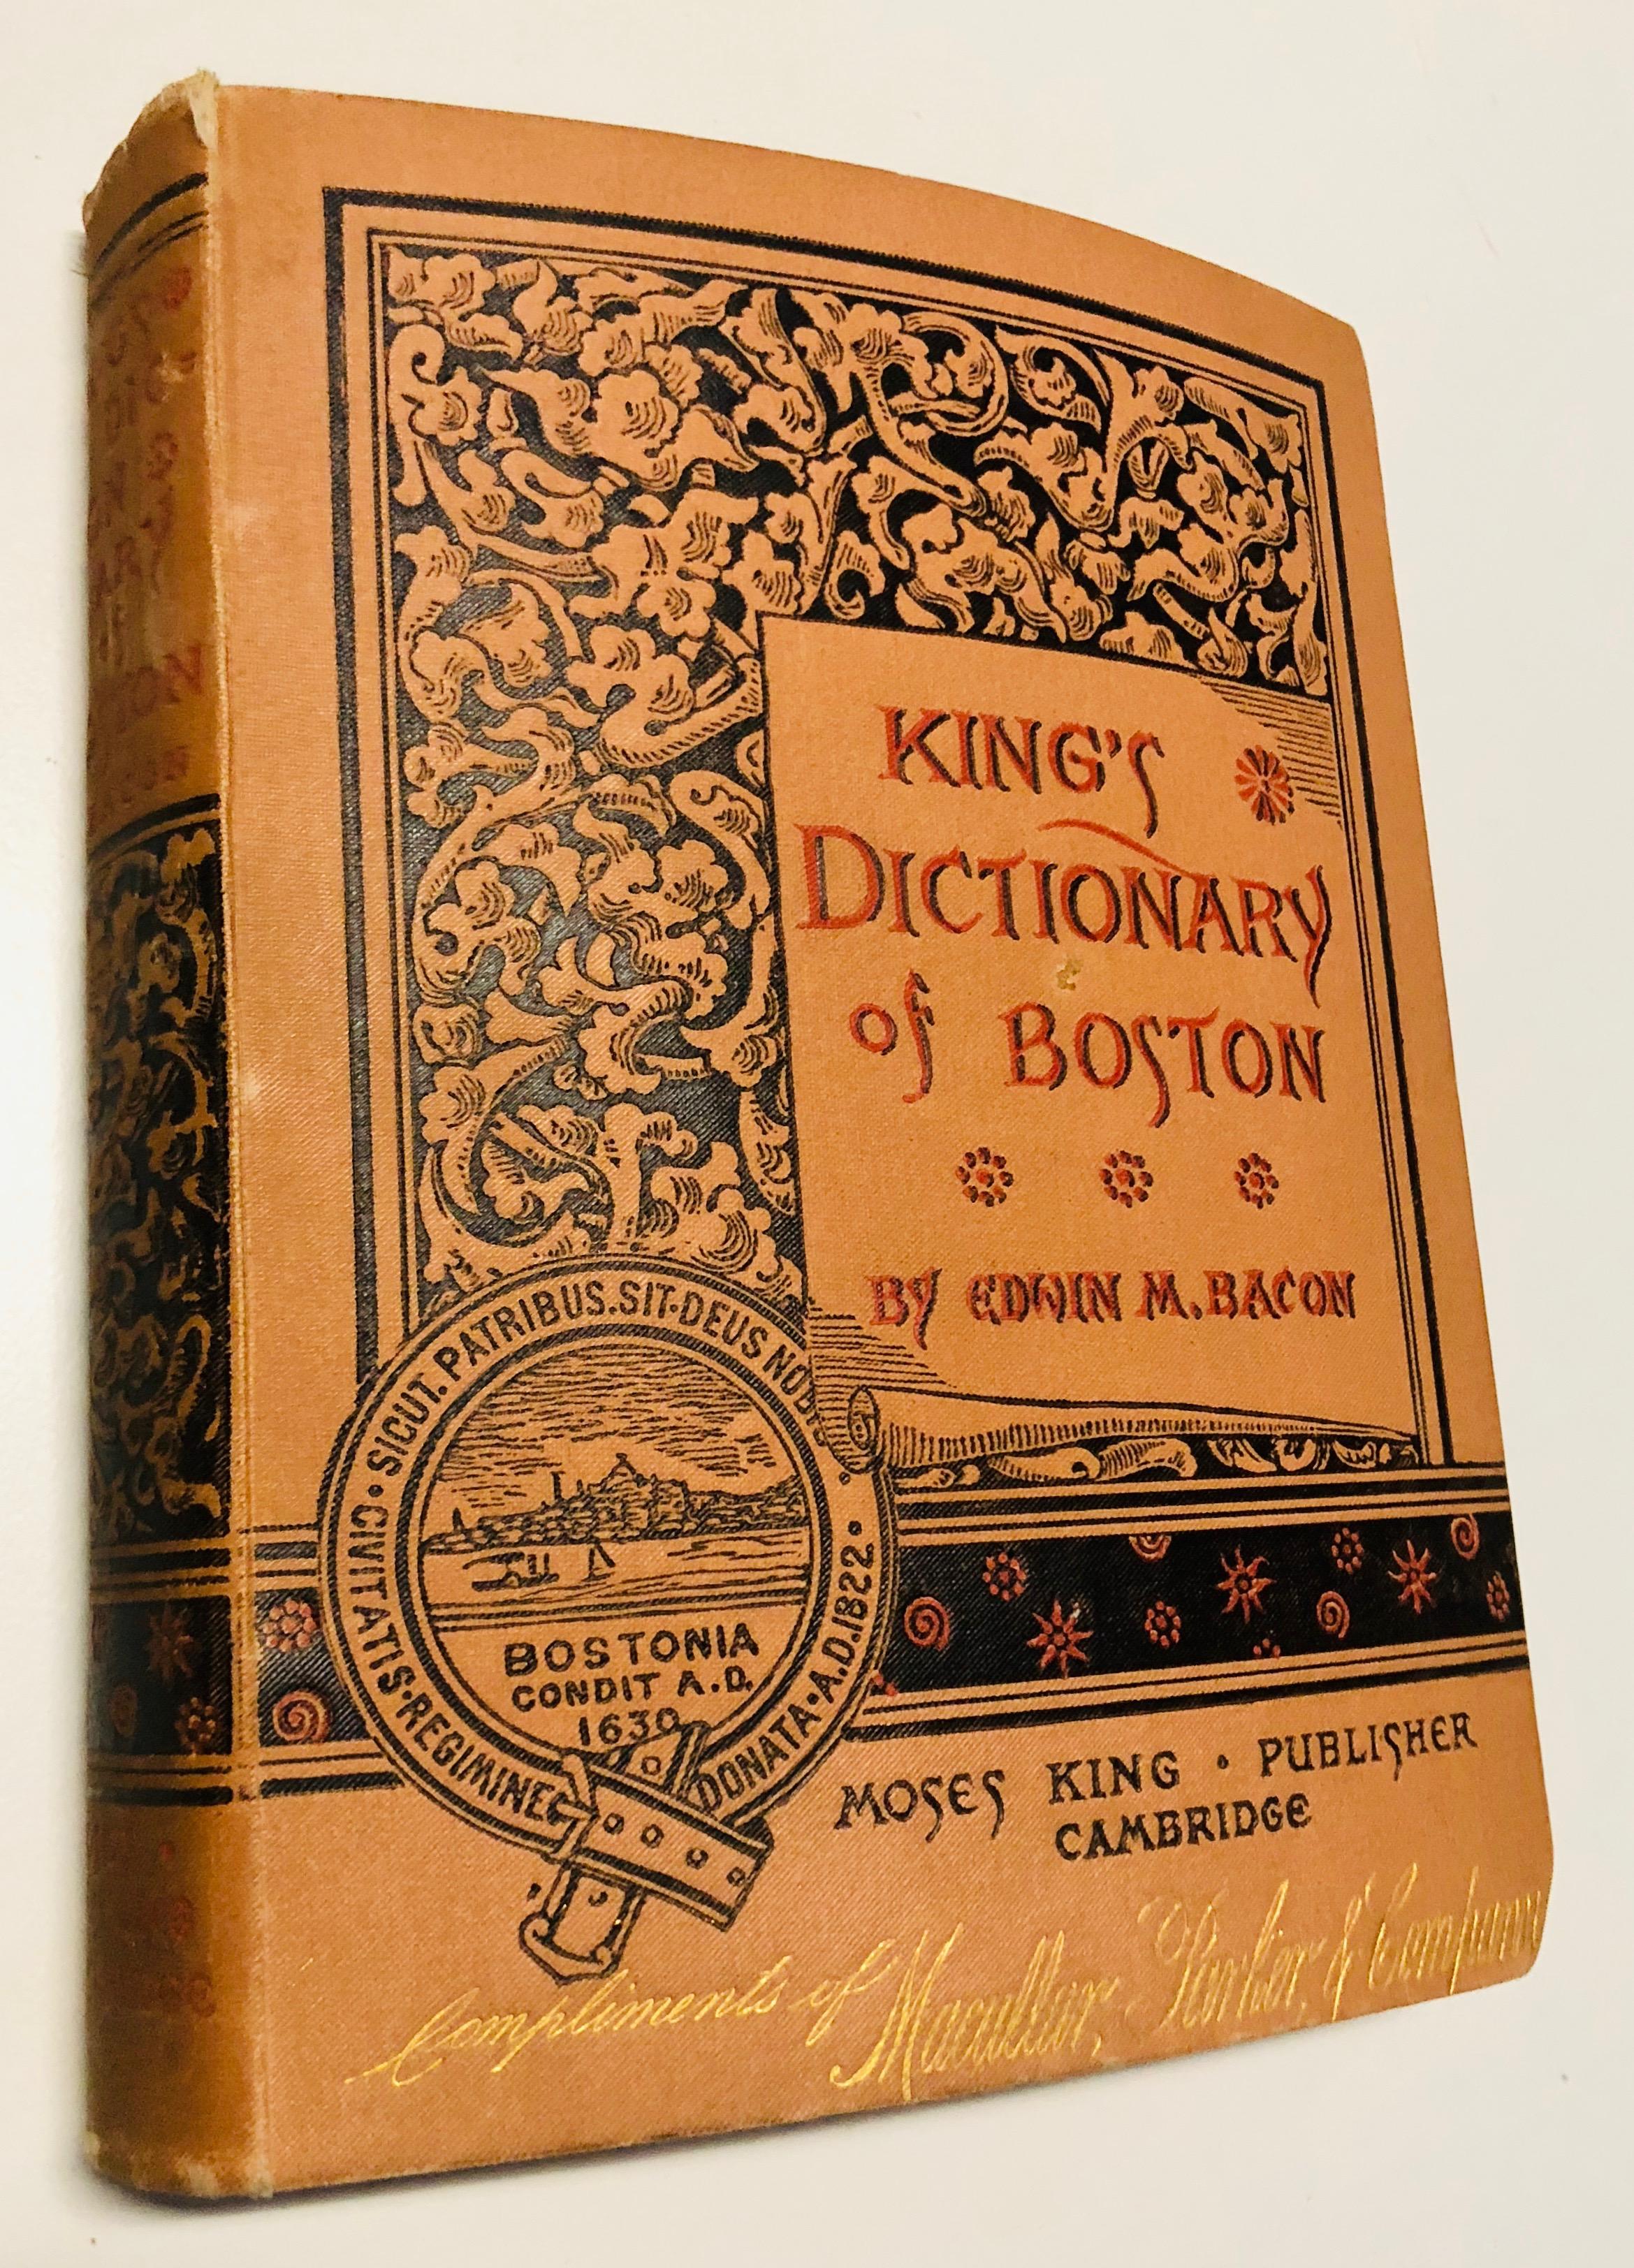 King's Dictionary of Boston by Edwin M. Bacon (1883)